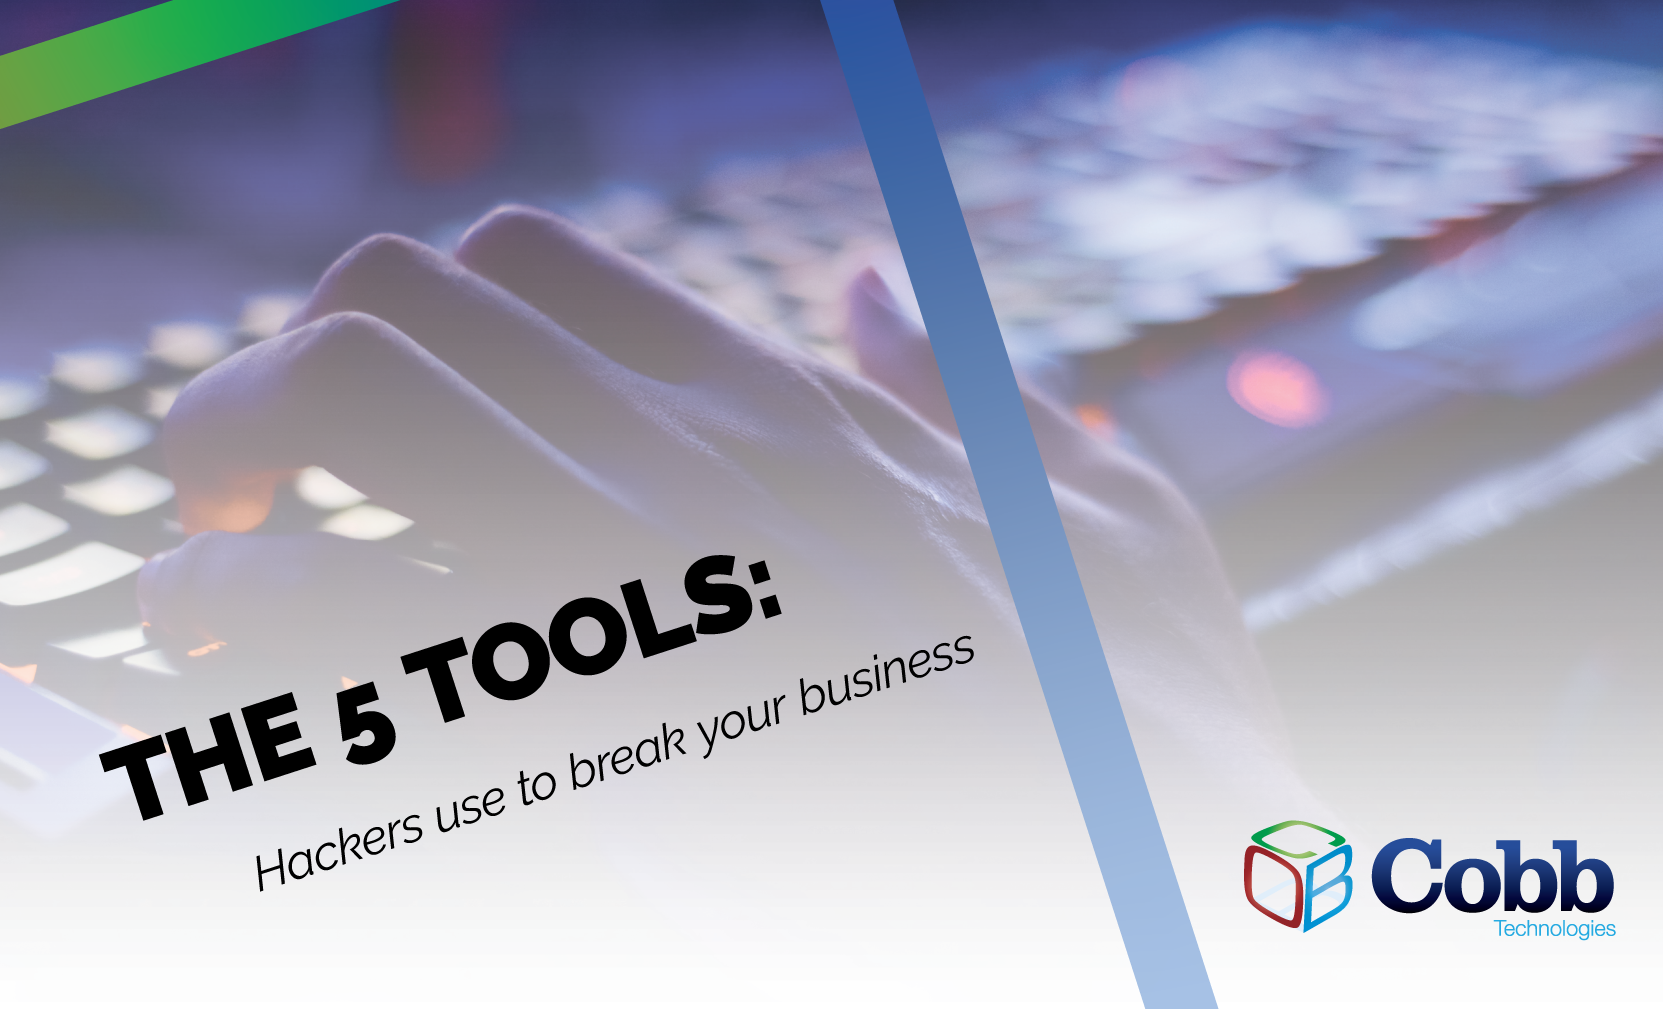 The 5 tools hackers use to break your business